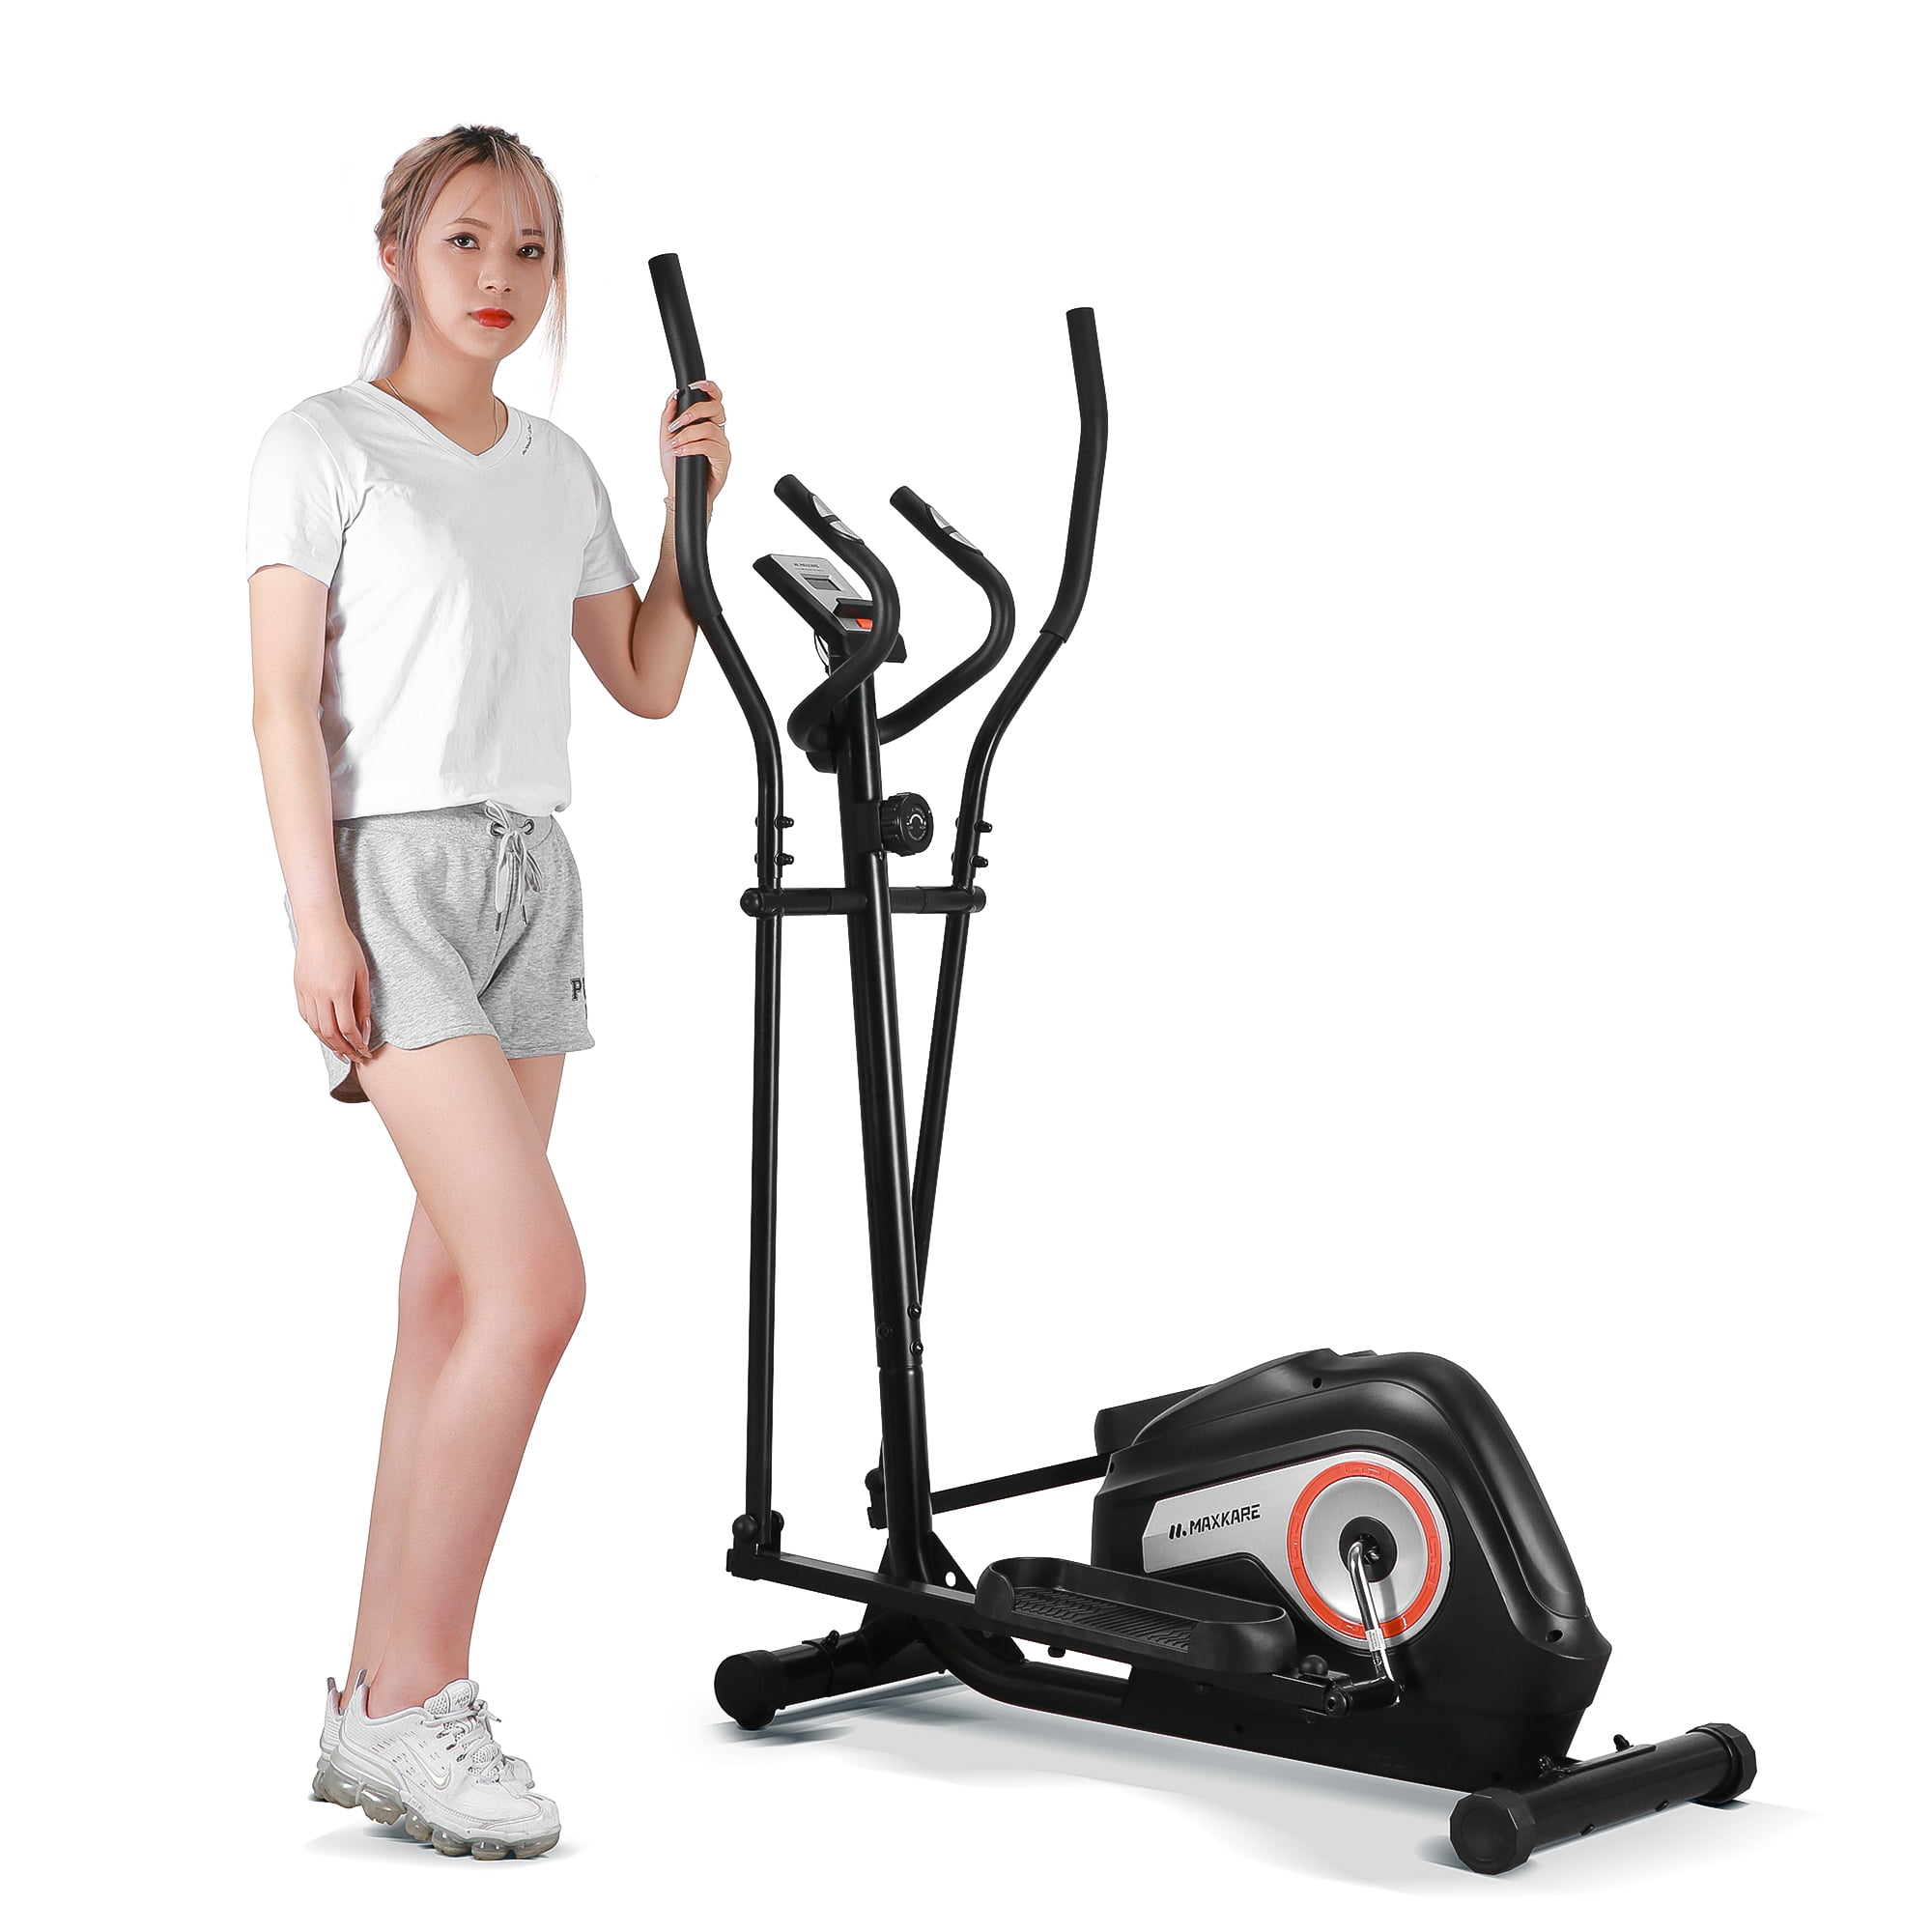 Details about   ANCHEER Eliptica Fitness Machine Elliptical Trainer Cardio Exercise Home Gym 